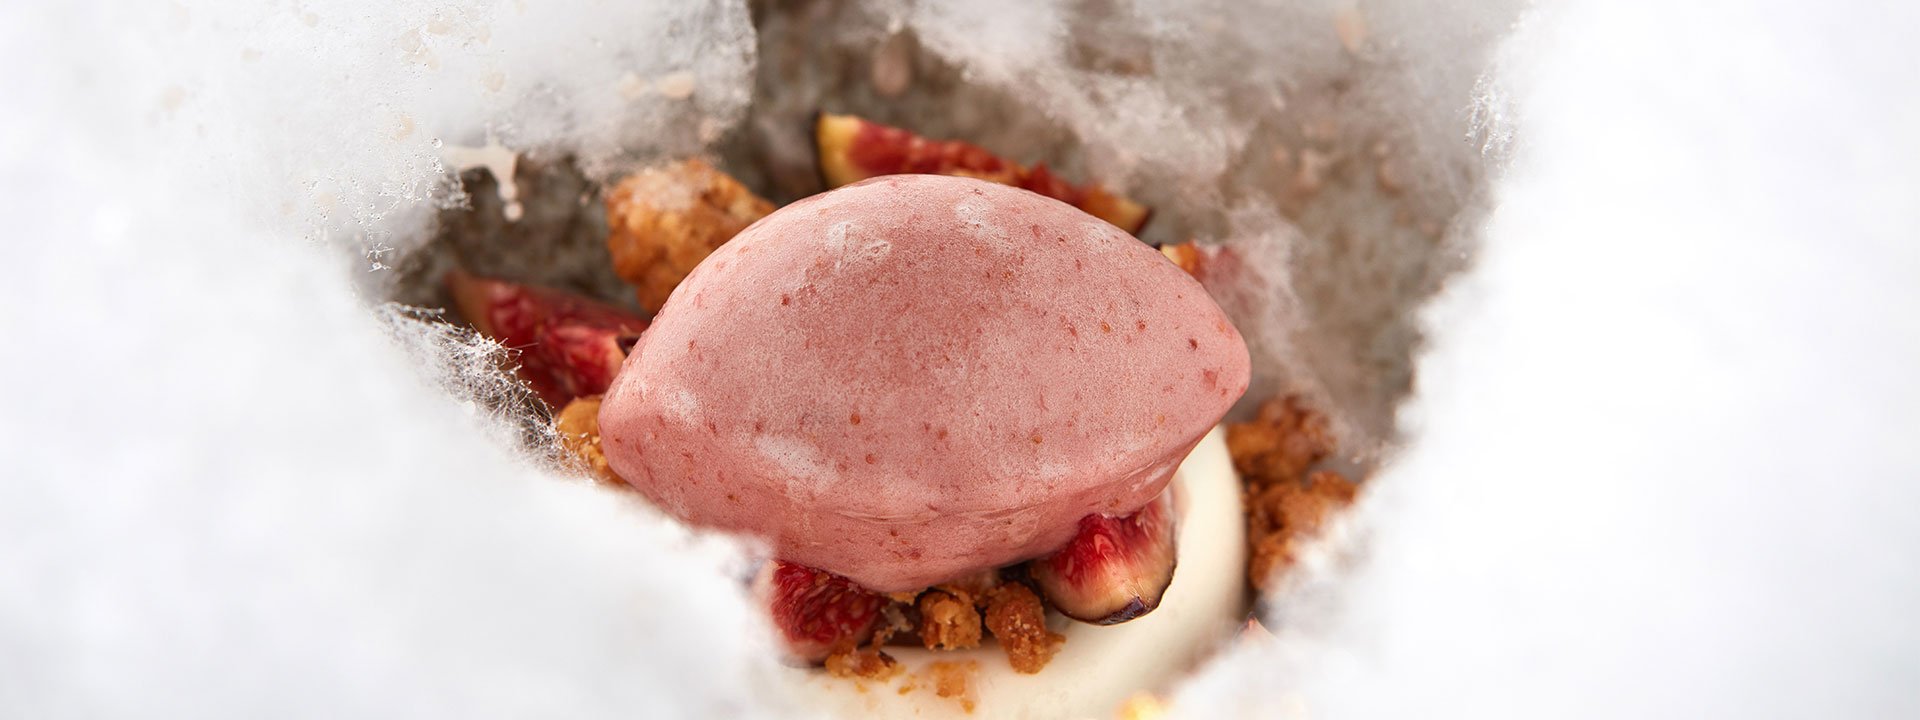 raspberry sorbet candyfloss with figs